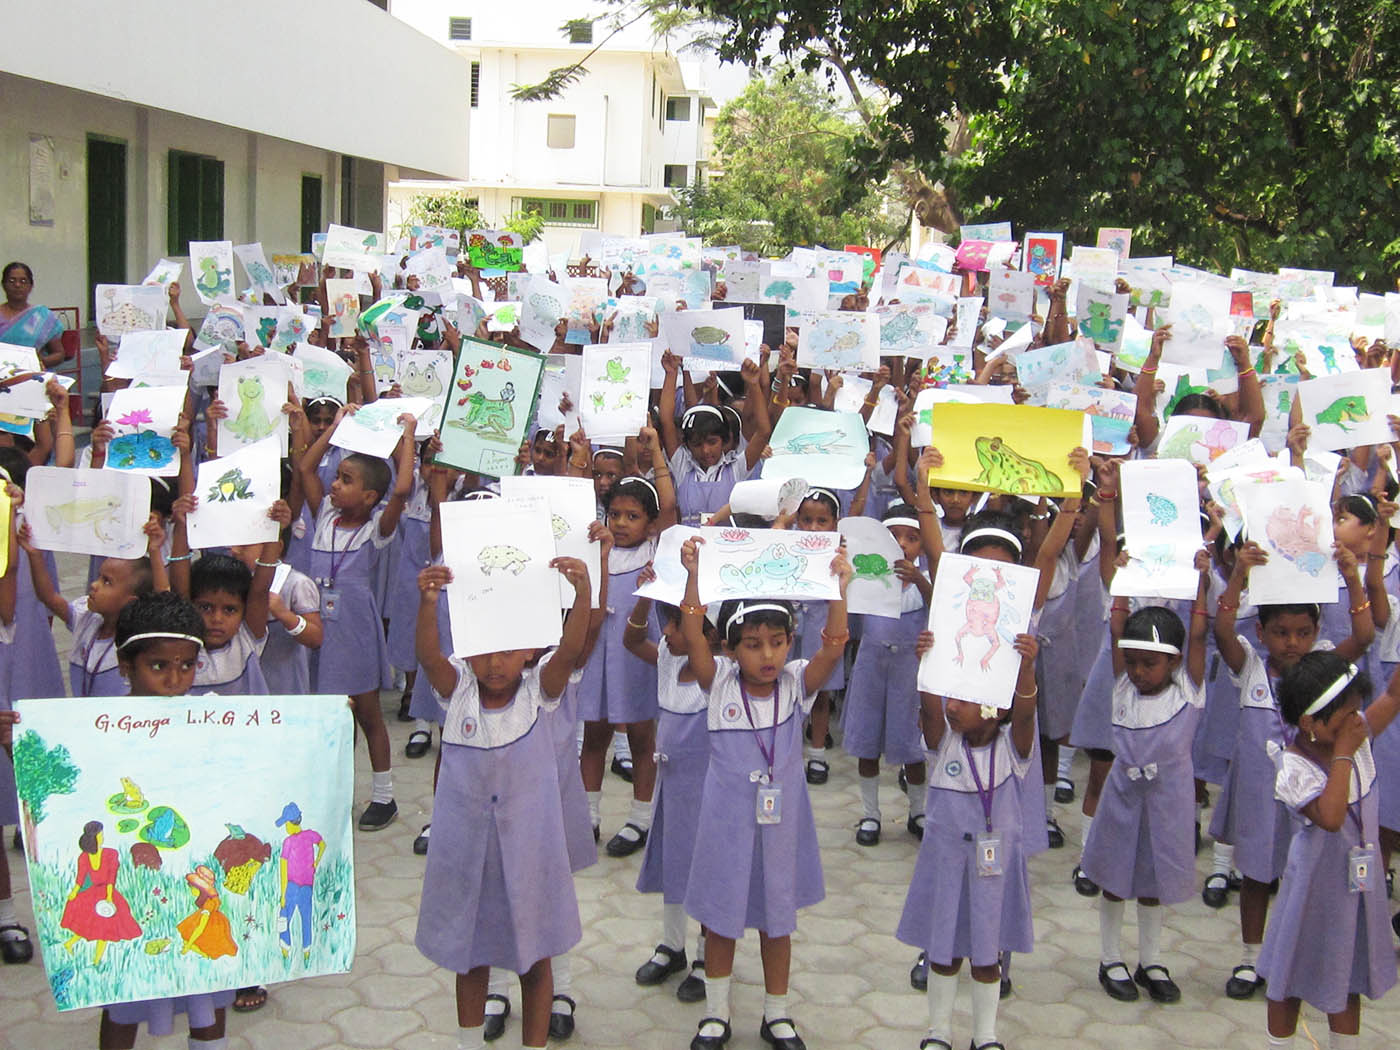 2013 art from Coimbatore PK Dhanam students Save The Frogs Day 2013 India